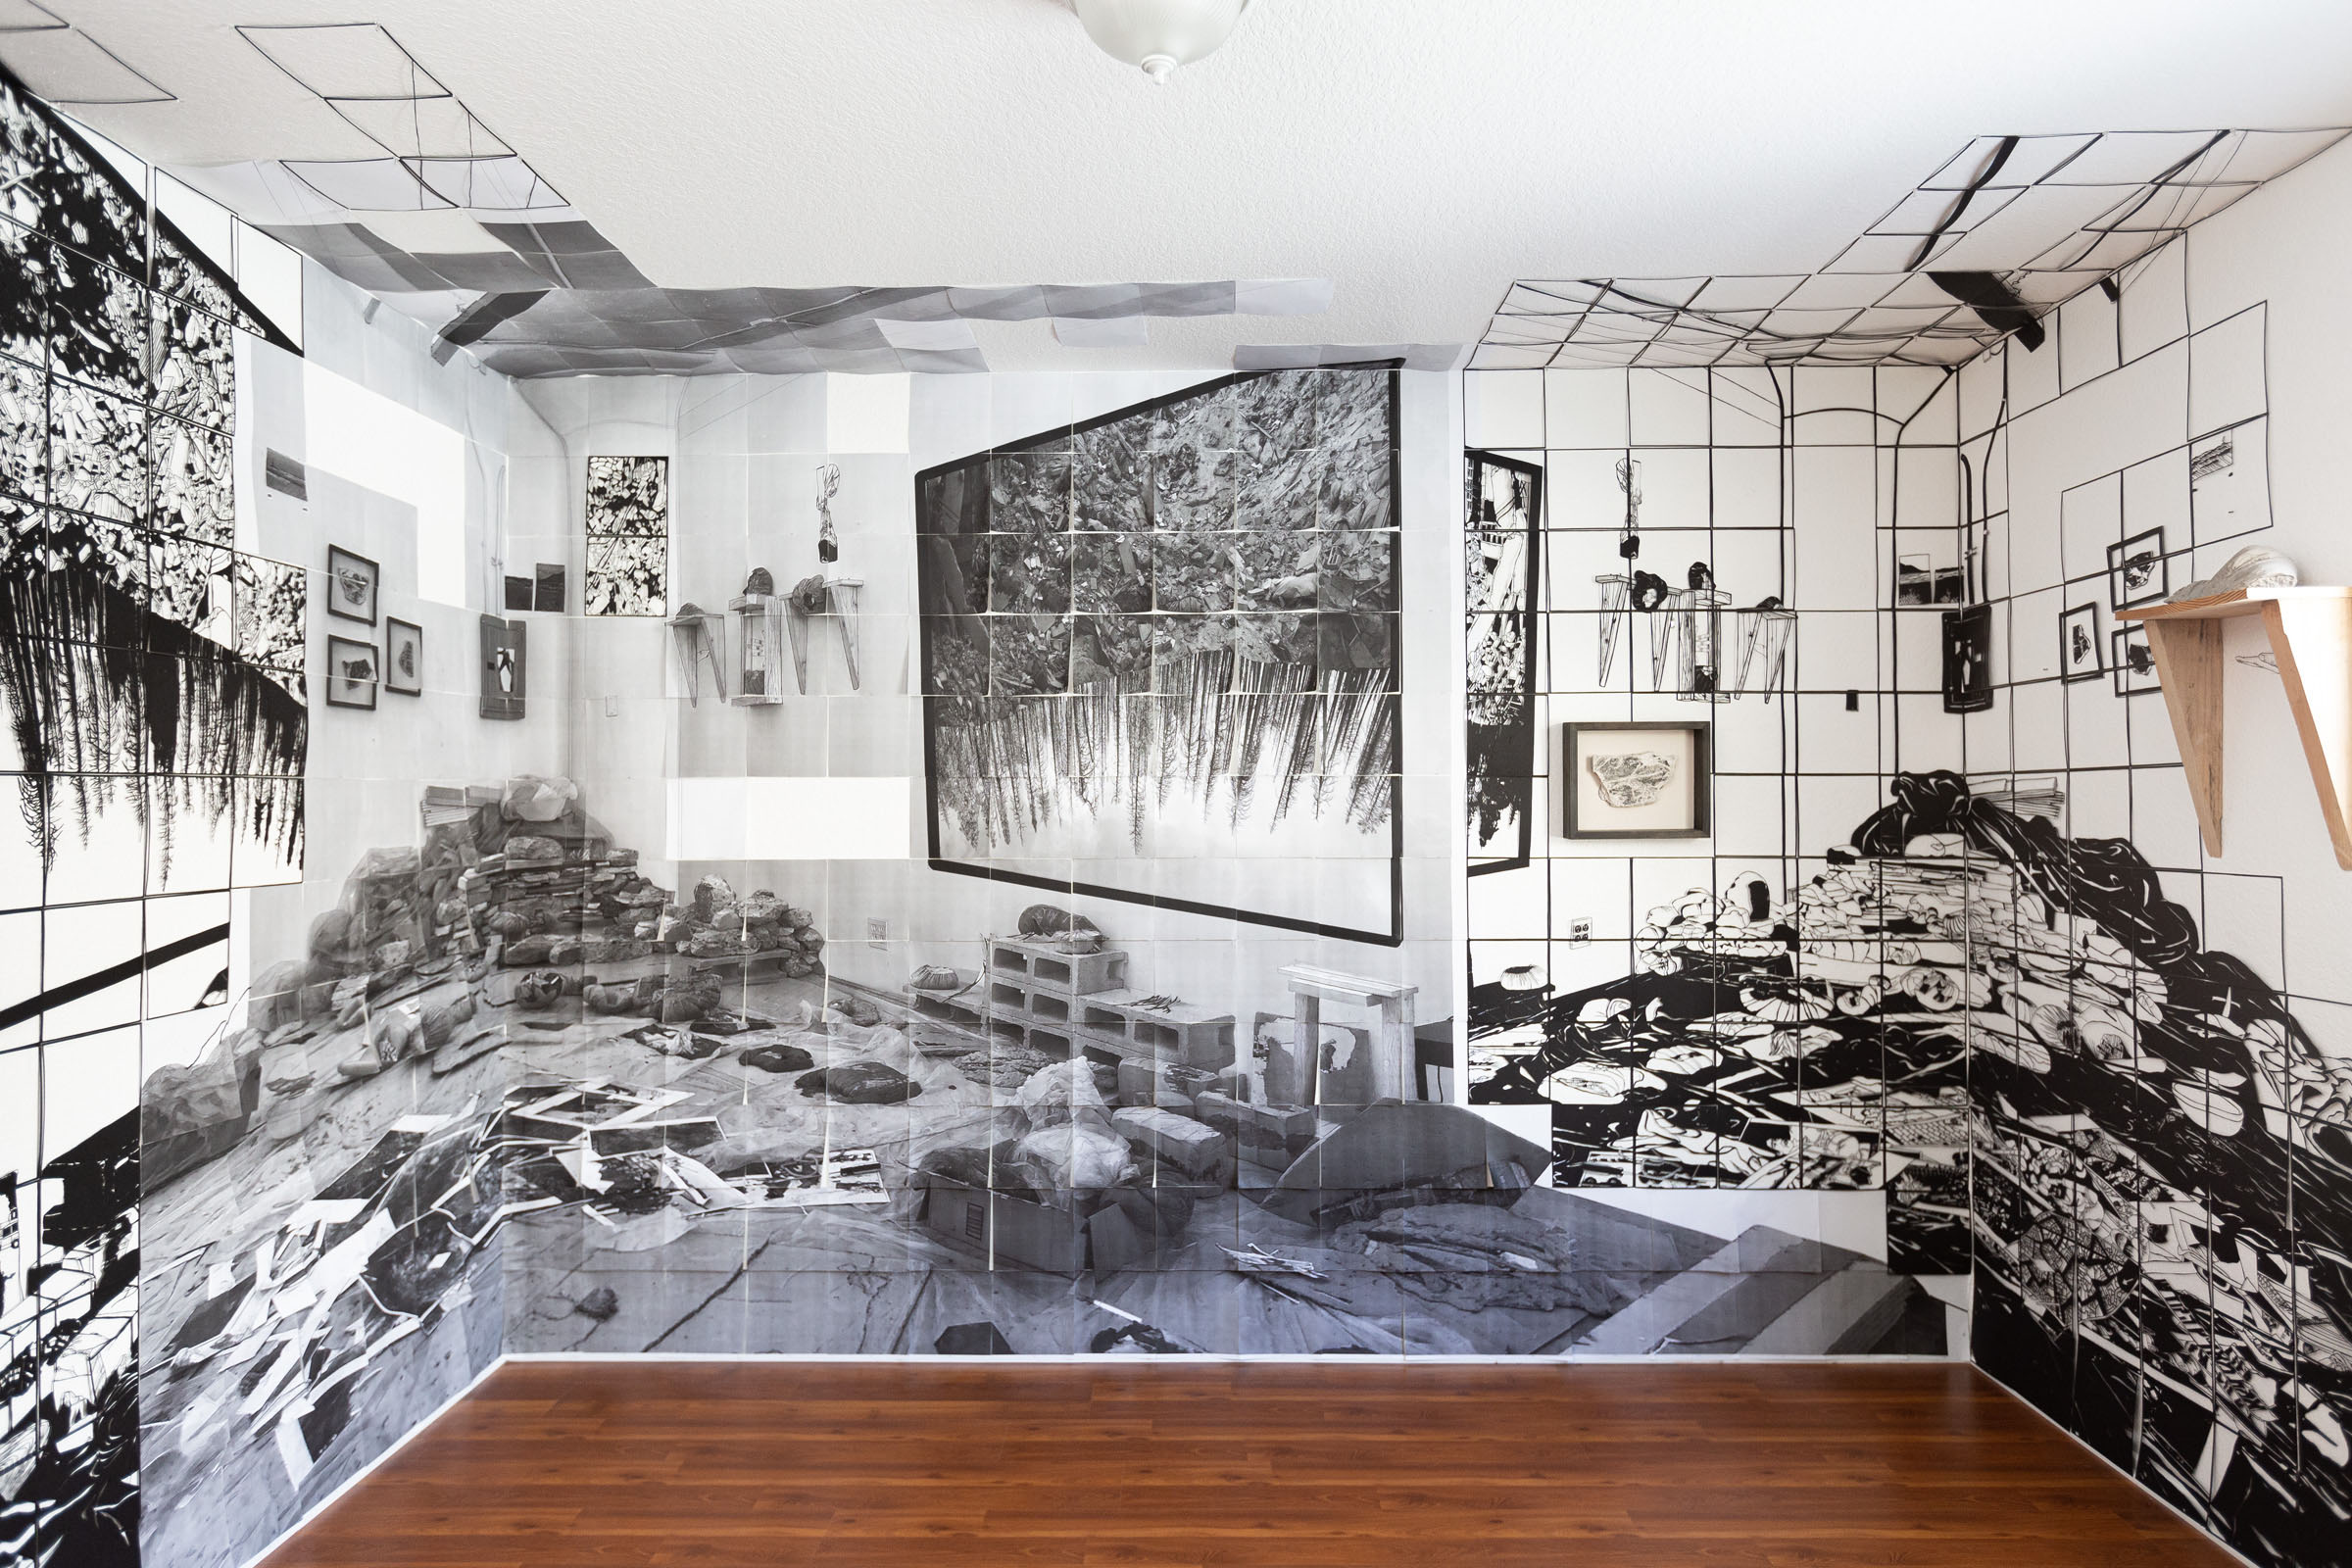 The Chaos in Order, 2020, manual paper-cutting, xerox prints, 138 x 138 x 95 inches